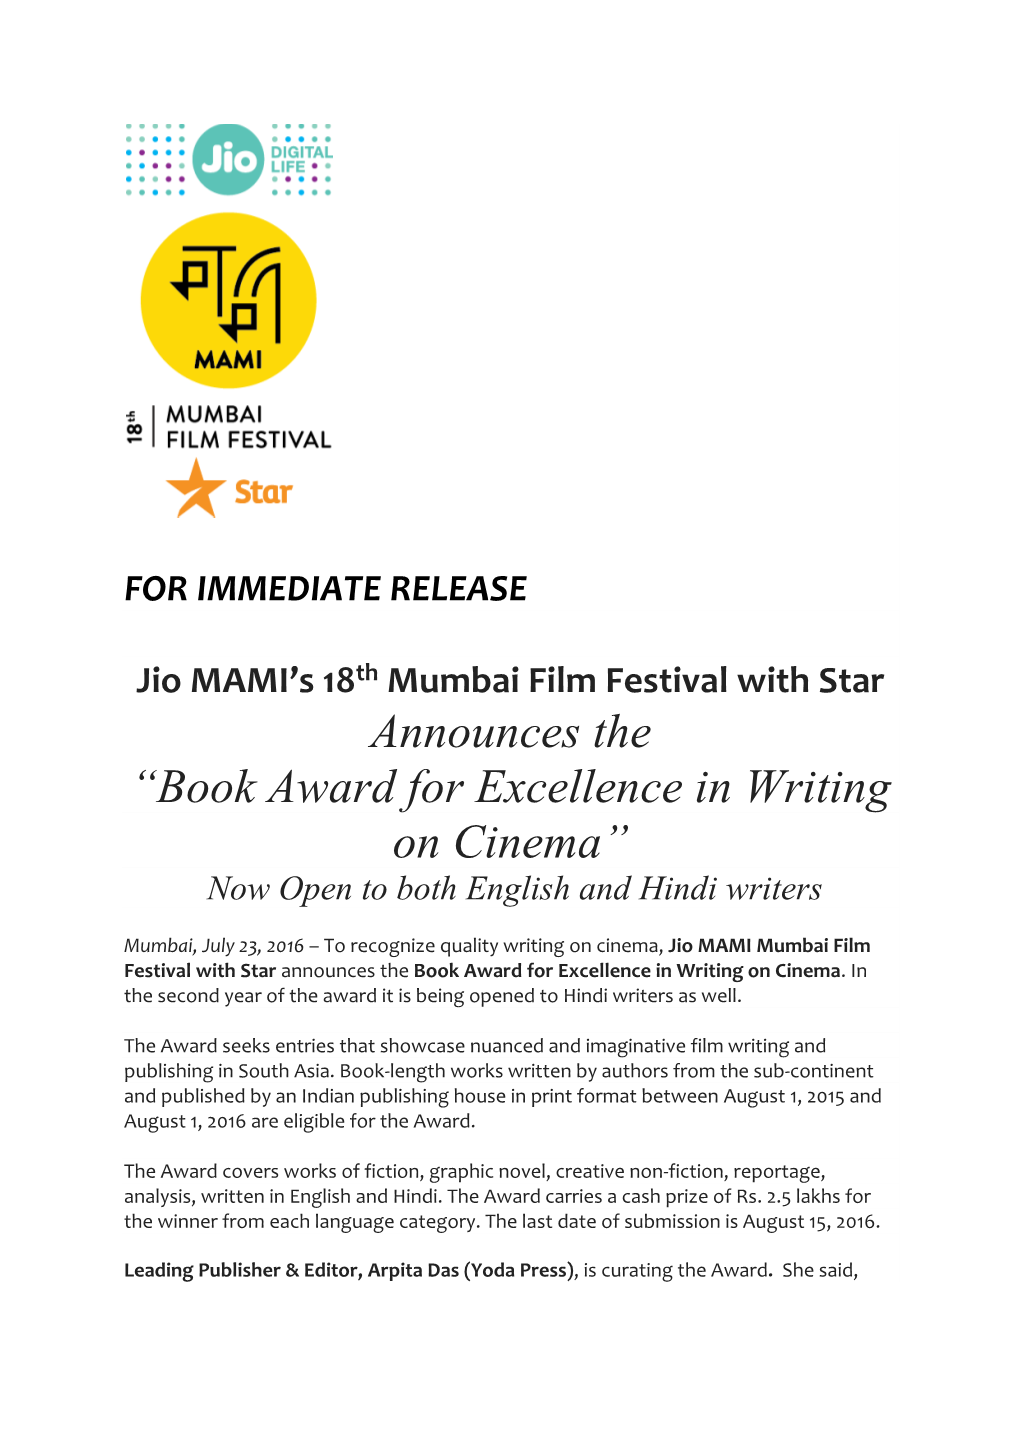 Book Award for Excellence in Writing on Cinema” Now Open to Both English and Hindi Writers